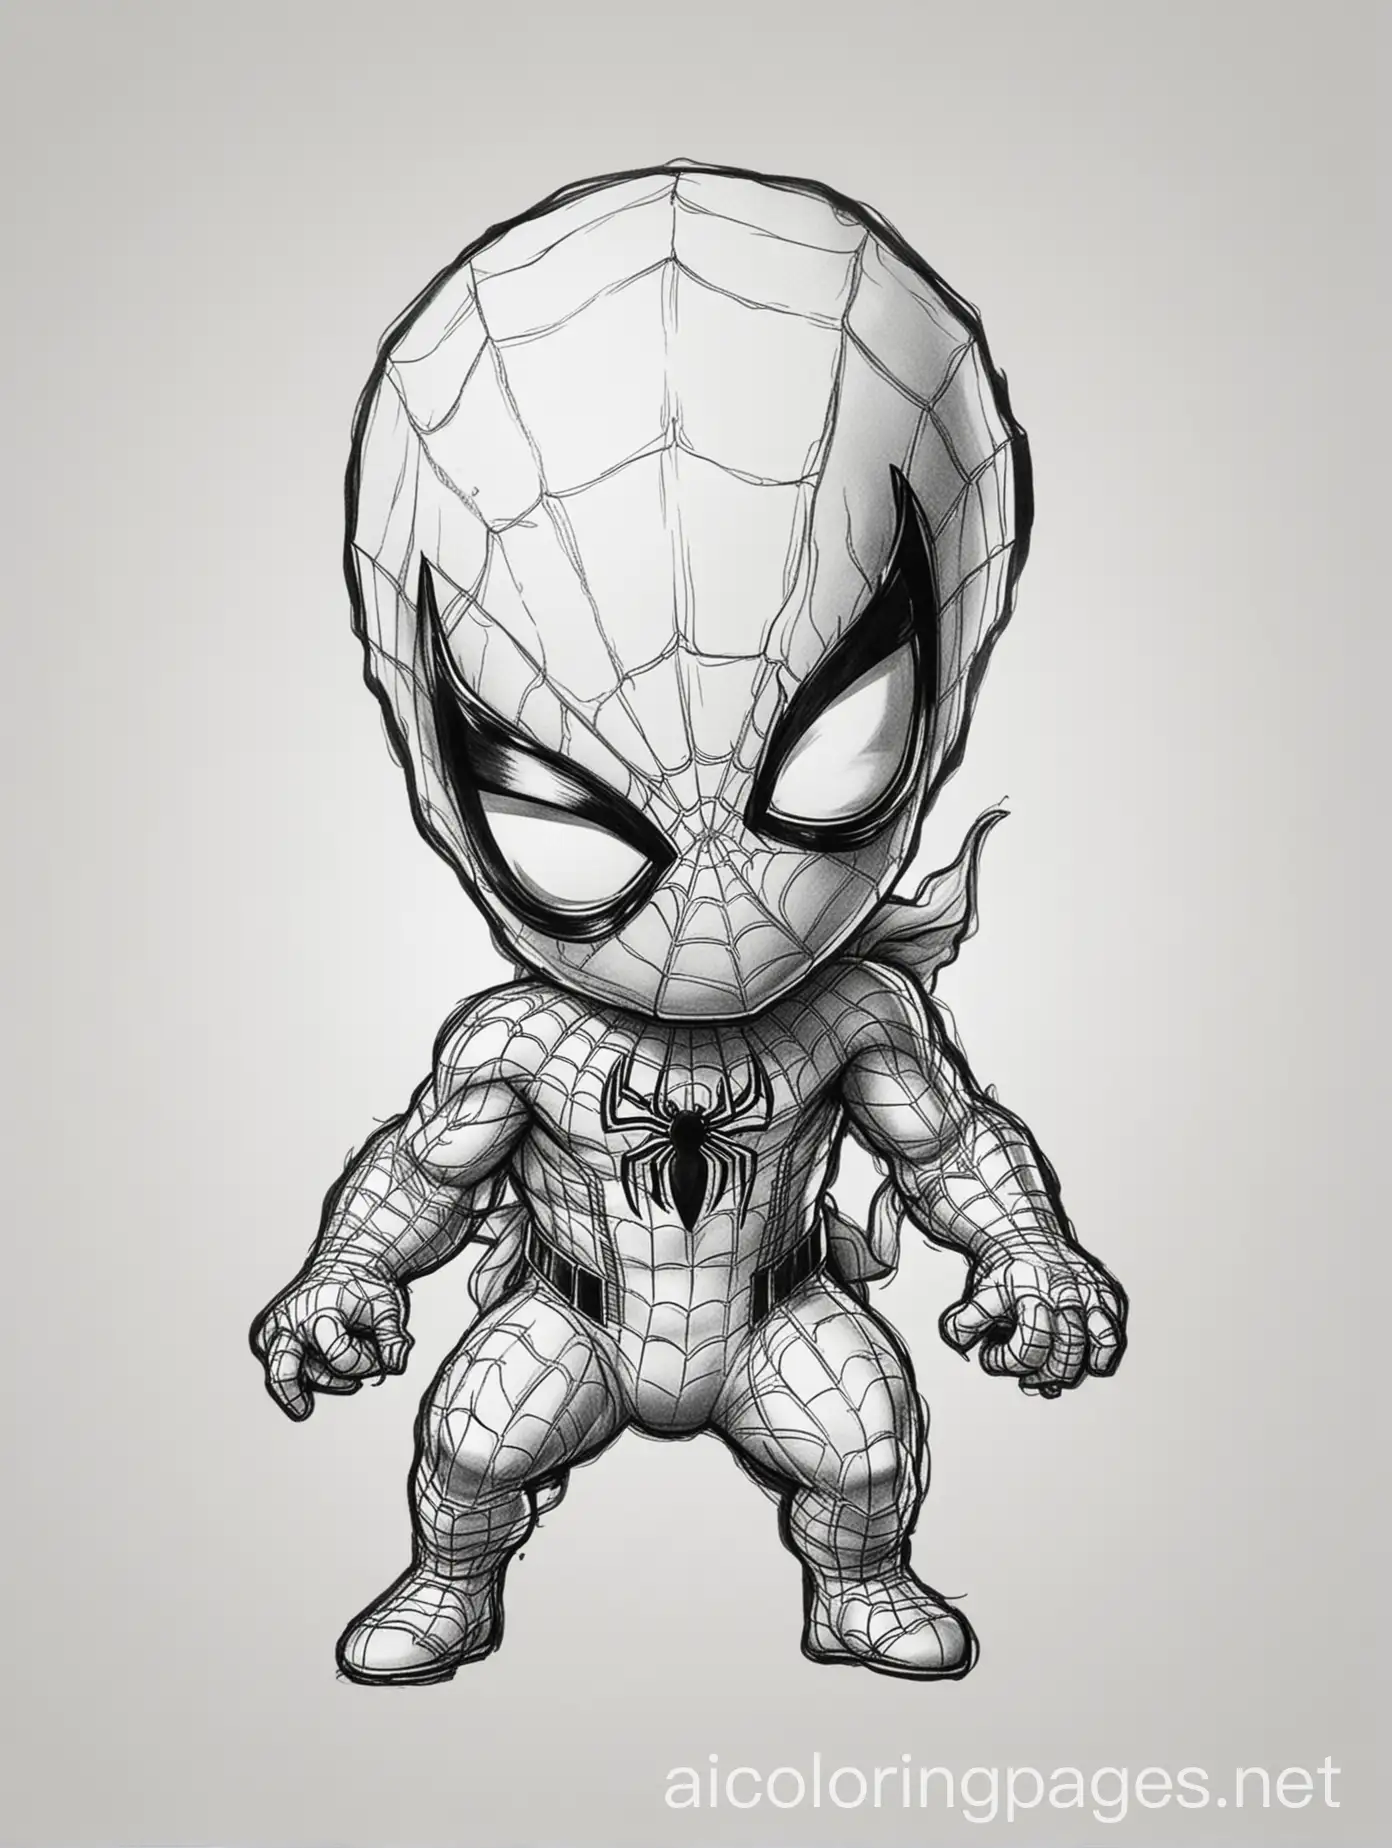 Adorable-Baby-SpiderMan-Coloring-Page-Black-and-White-Line-Art-on-A4-Size-with-Ample-White-Space